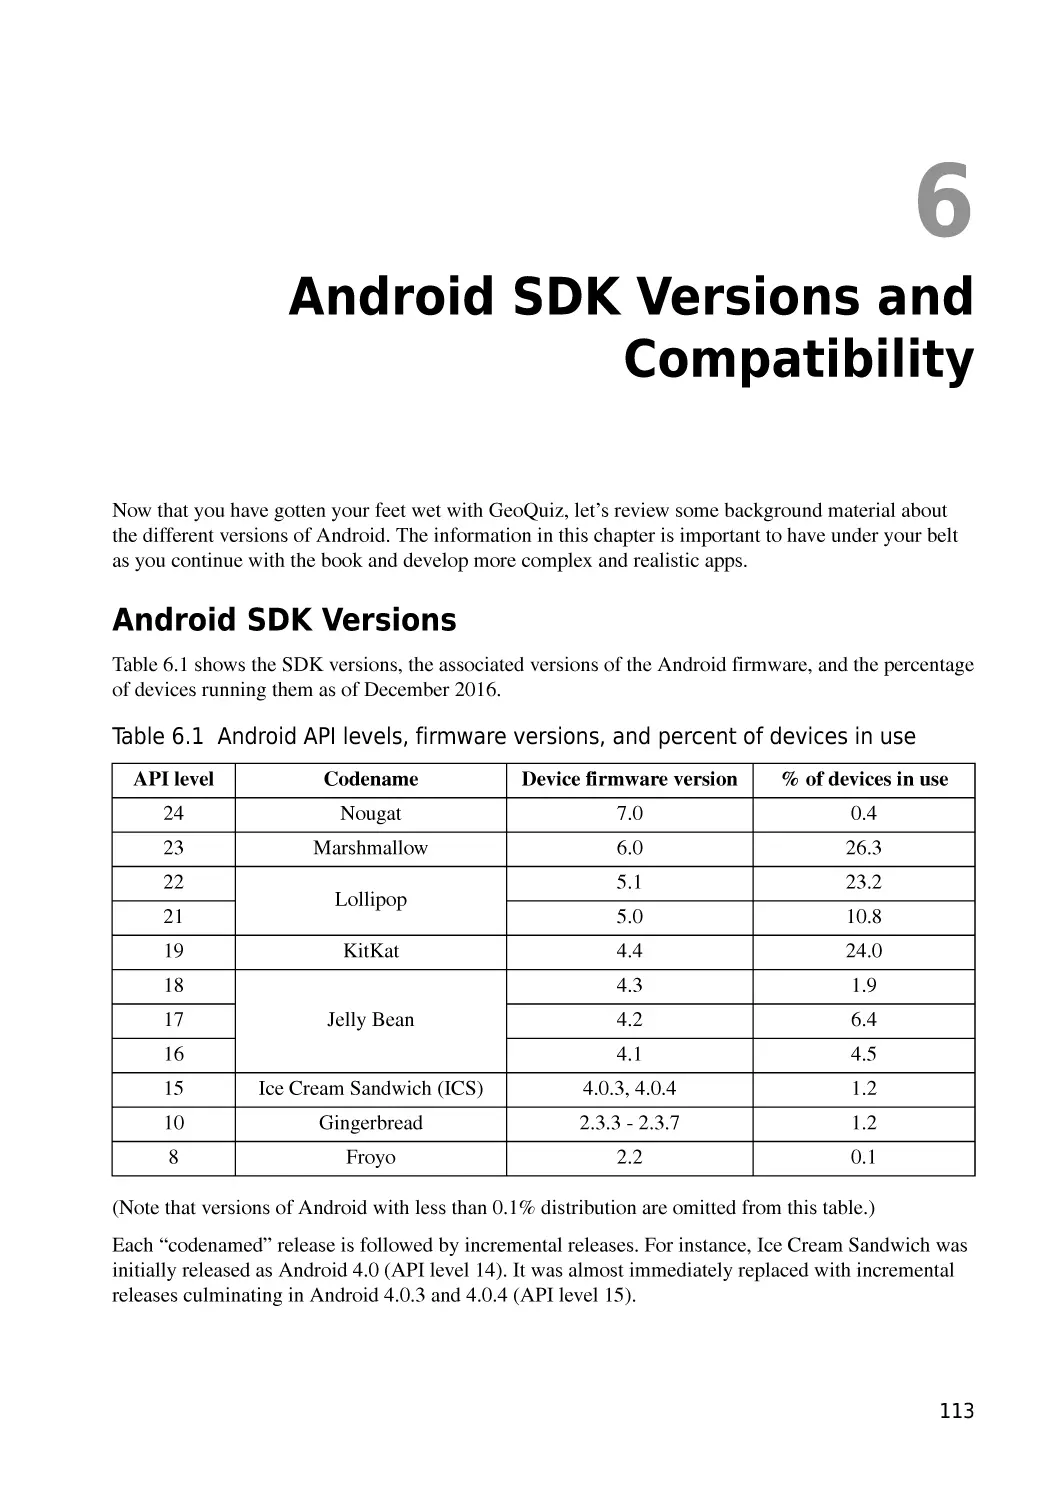 Chapter 6  Android SDK Versions and Compatibility
Android SDK Versions